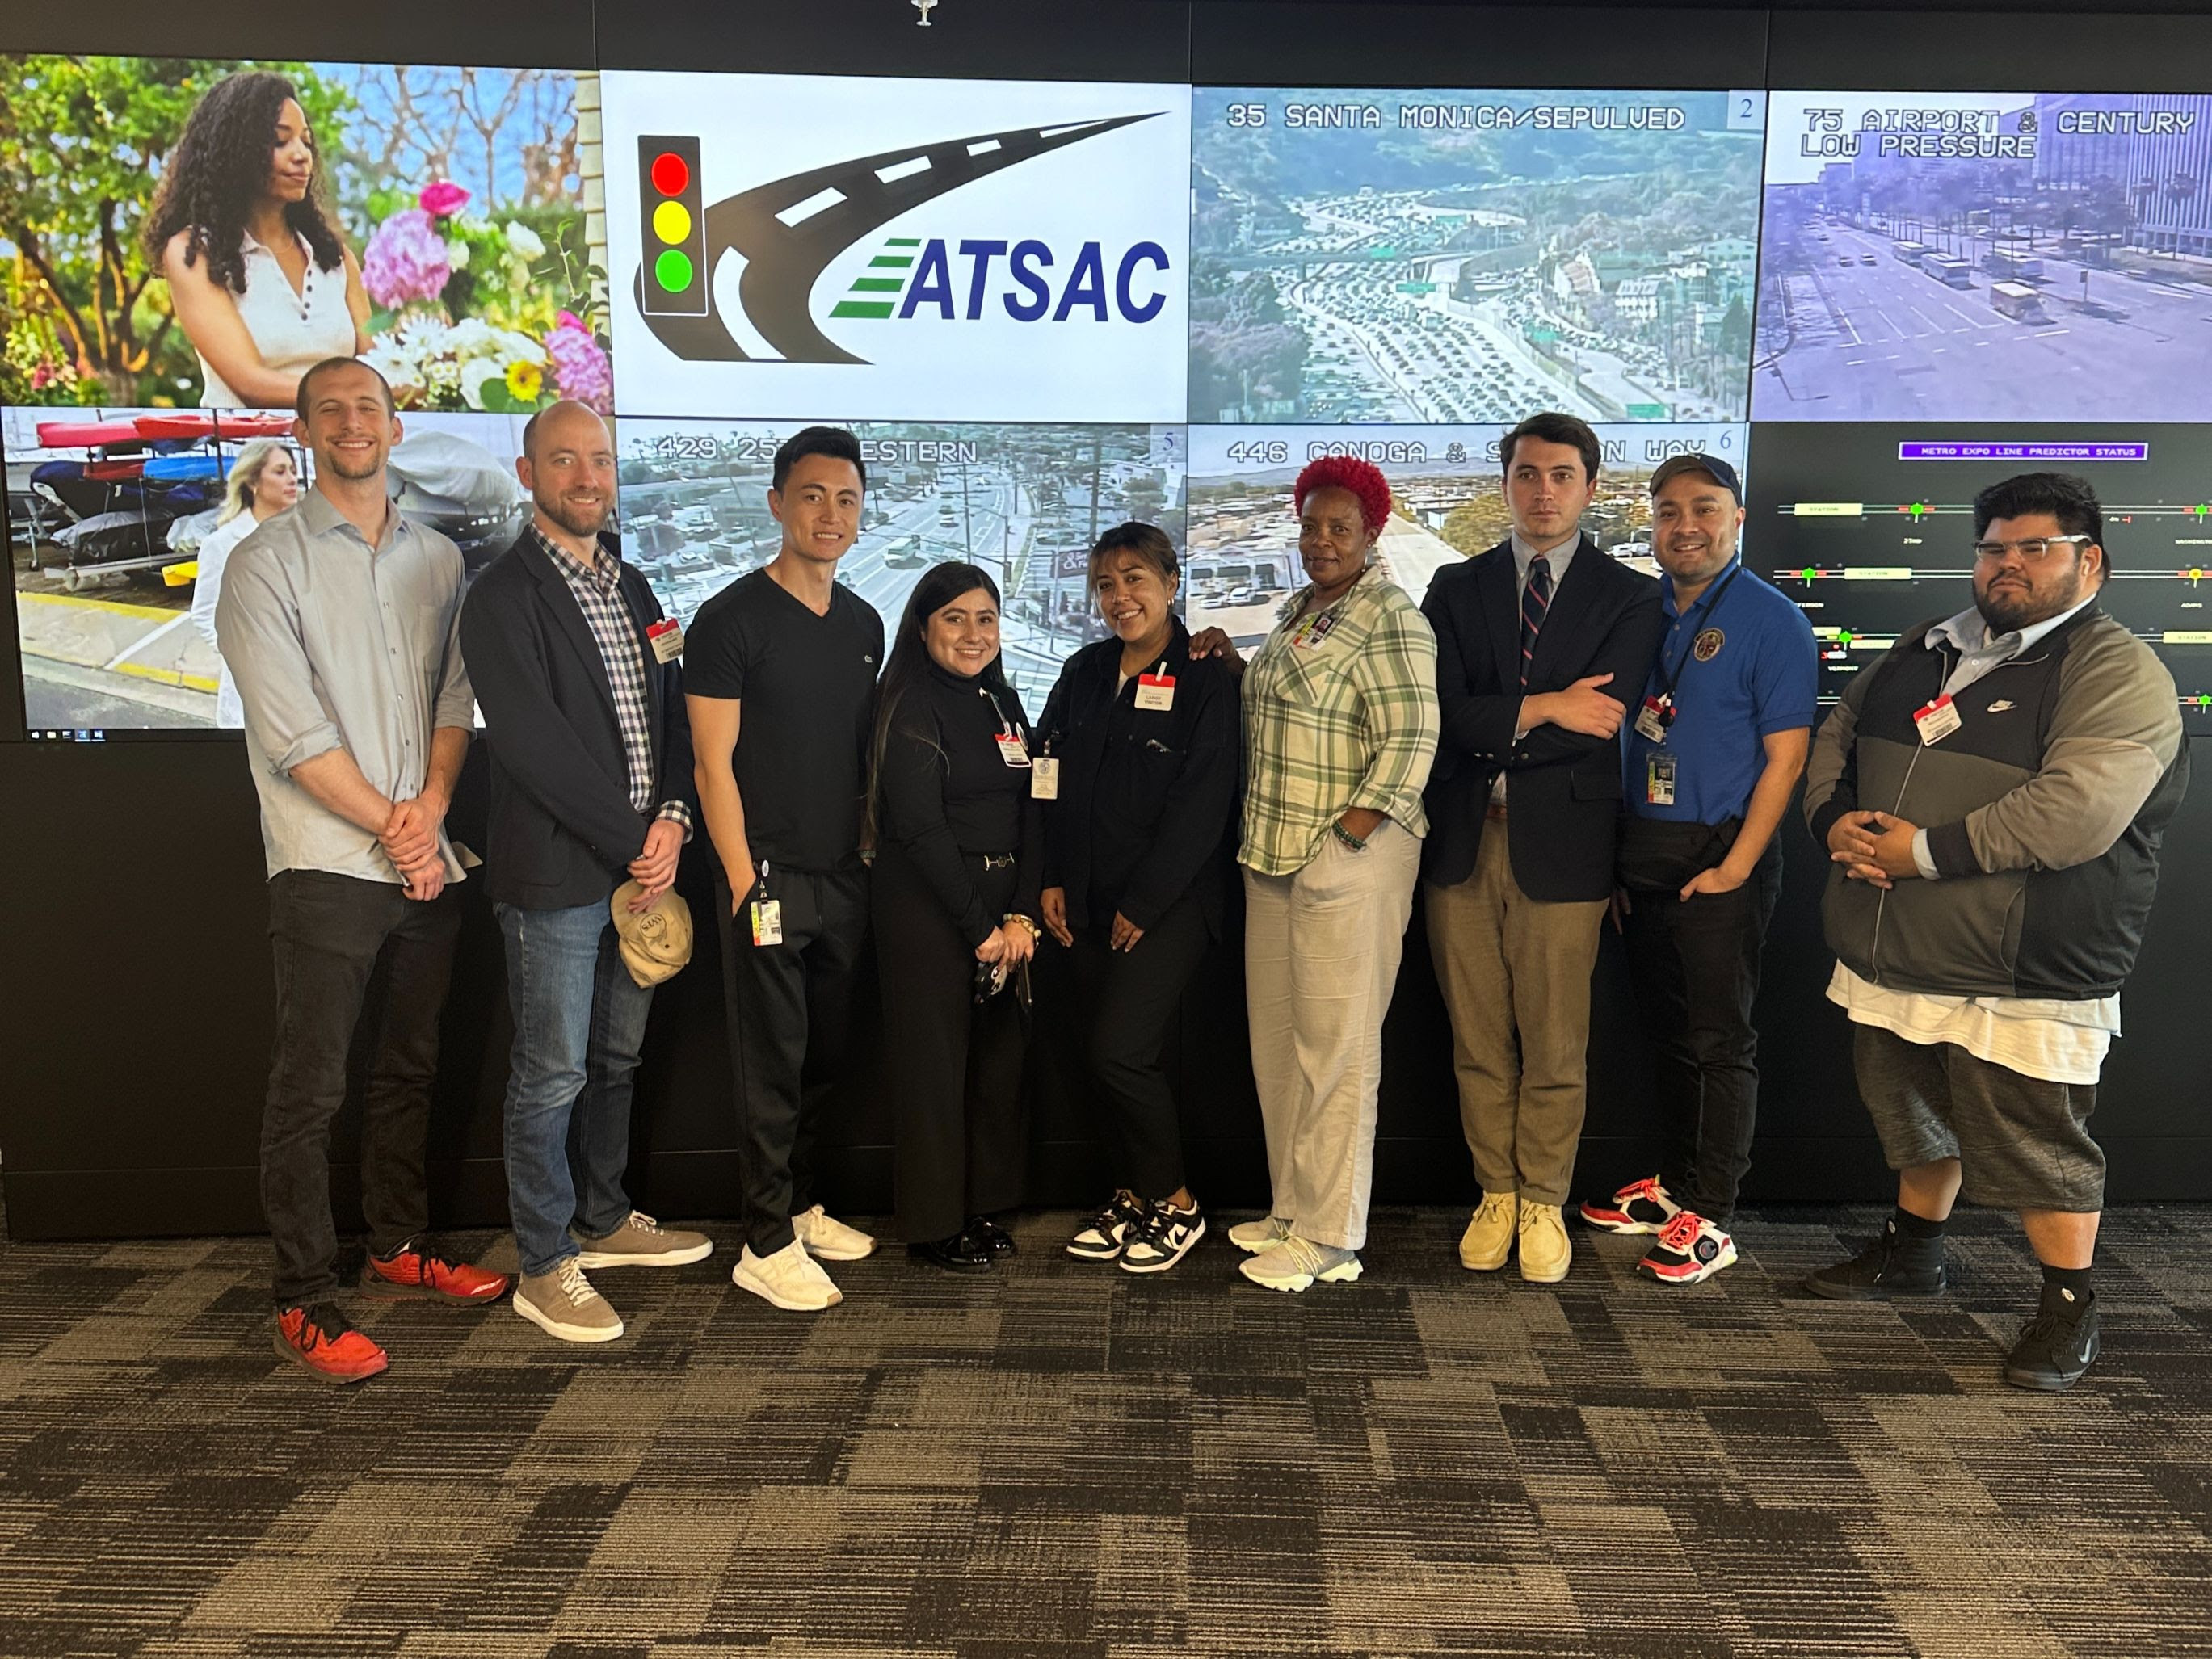 Img Council Districts Tour LADOT’s State Of The Art ATSAC Center 2